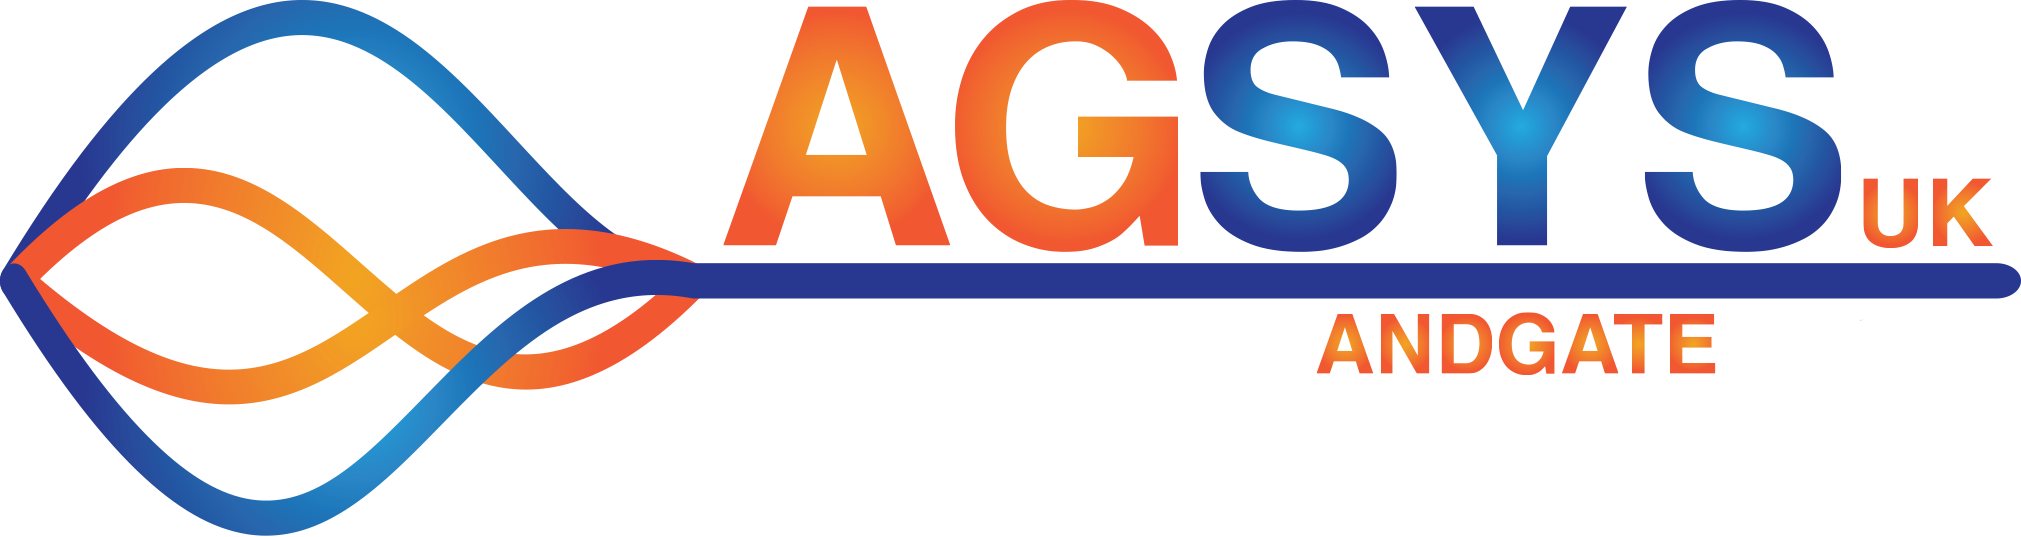 Andgate Systems logo